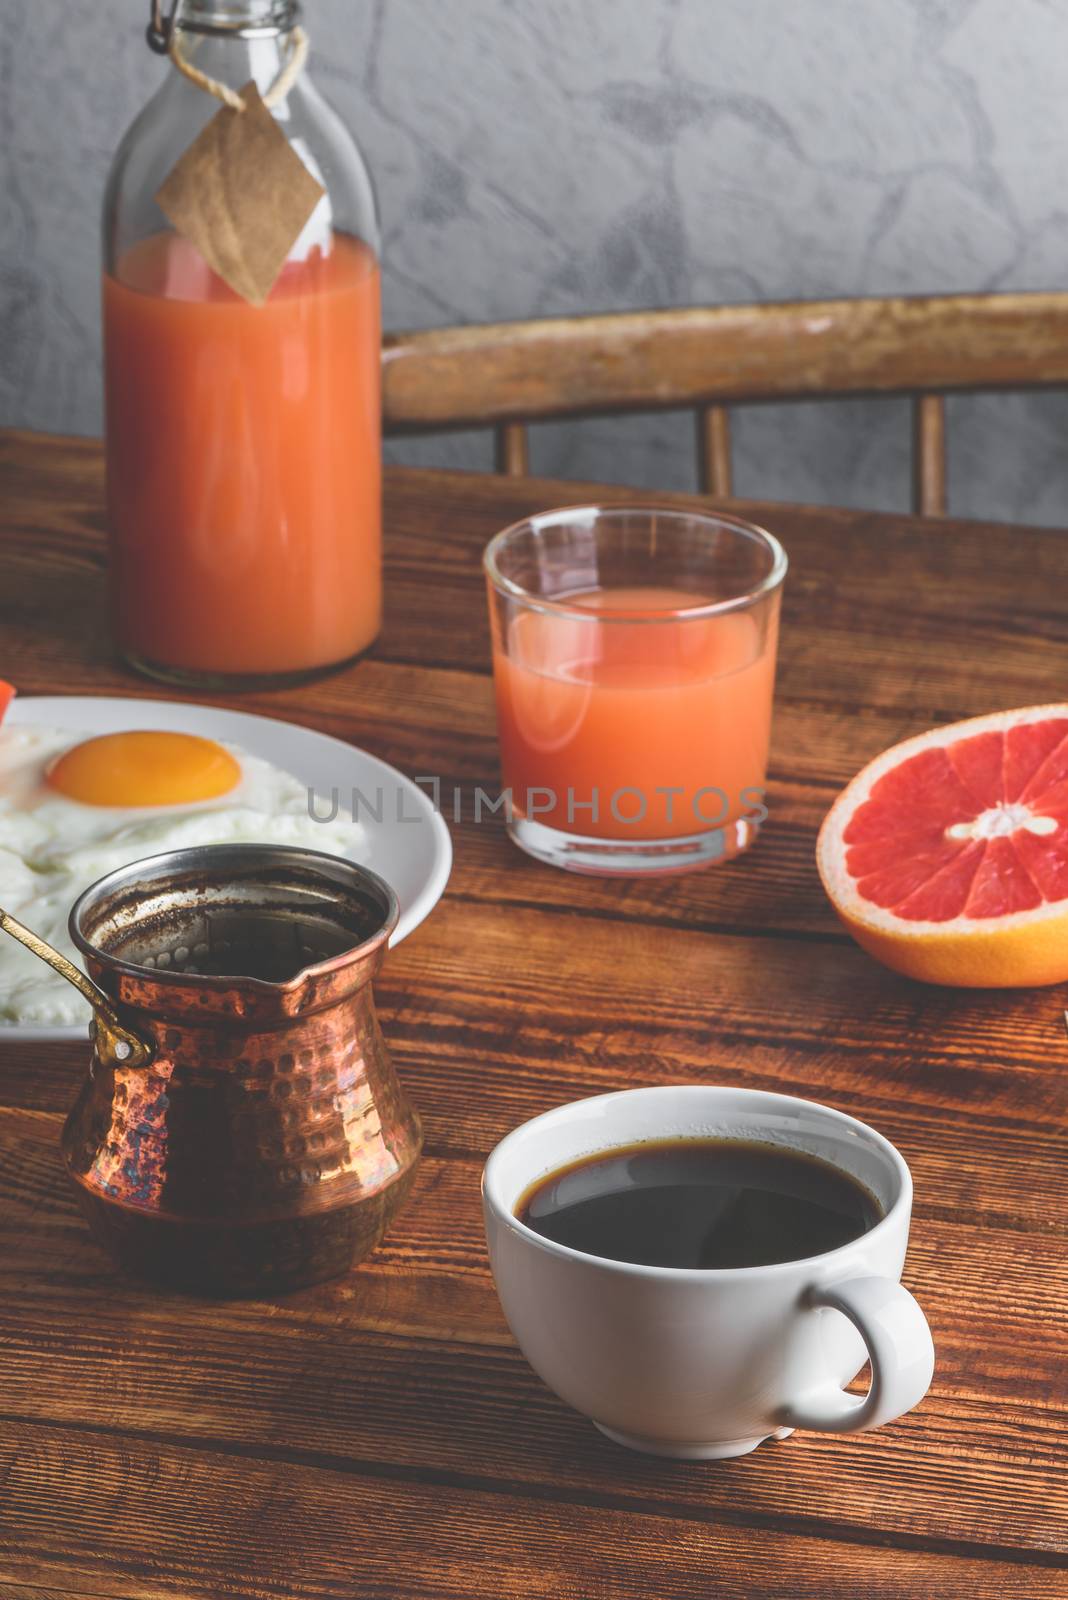 Breakfast with turkish coffee, fried eggs, juice and fruits over wooden table